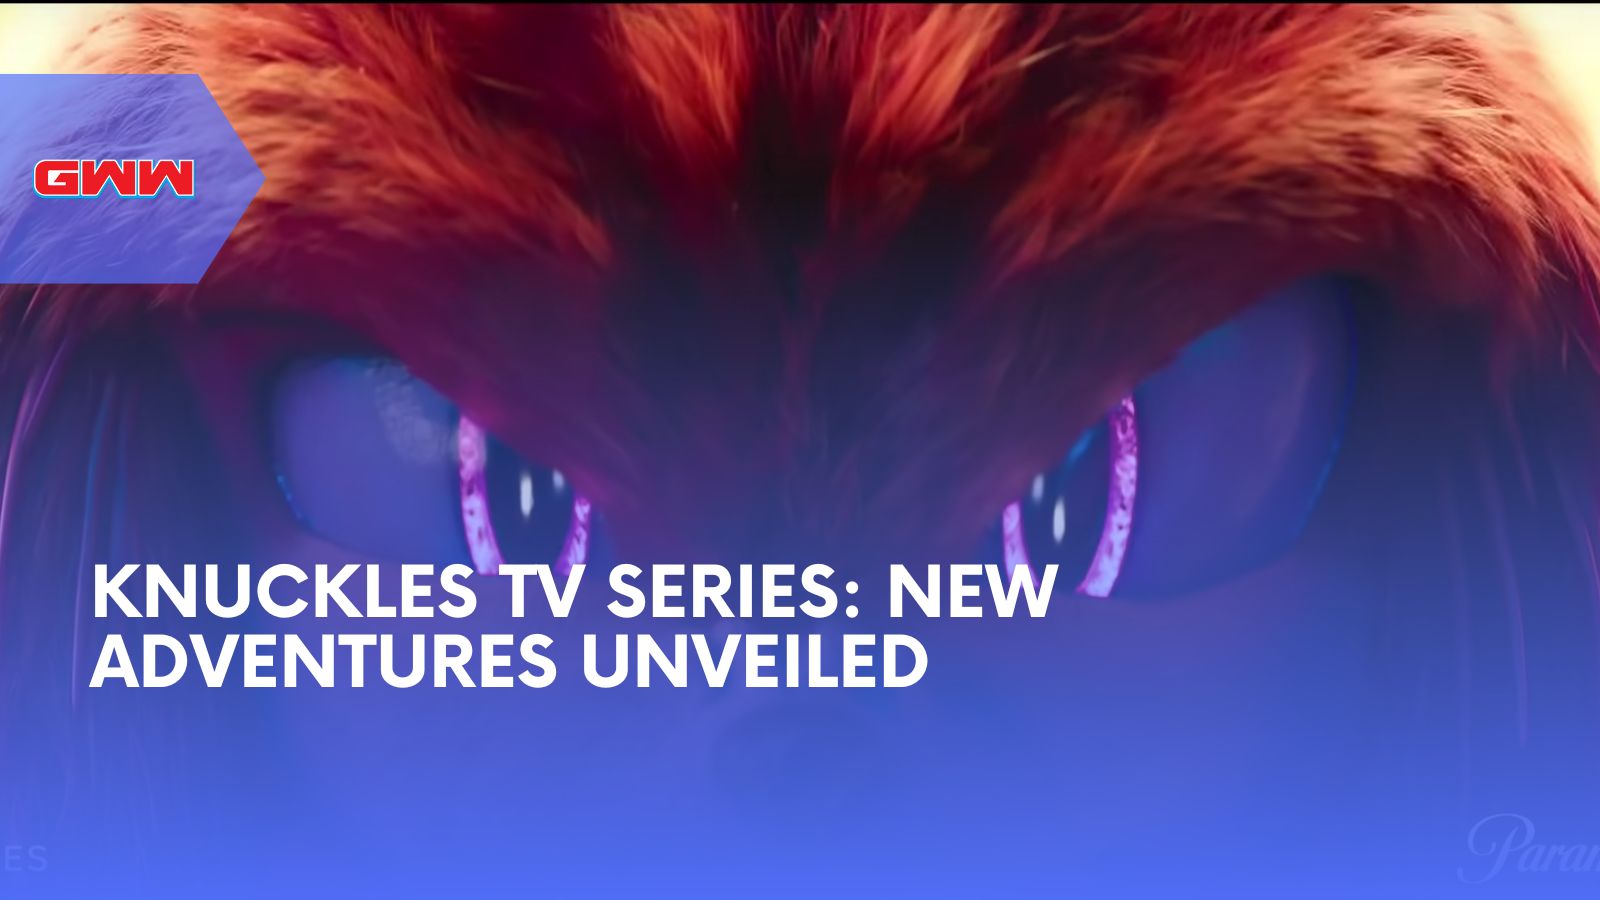 Knuckles TV Series: New Adventures Unveiled